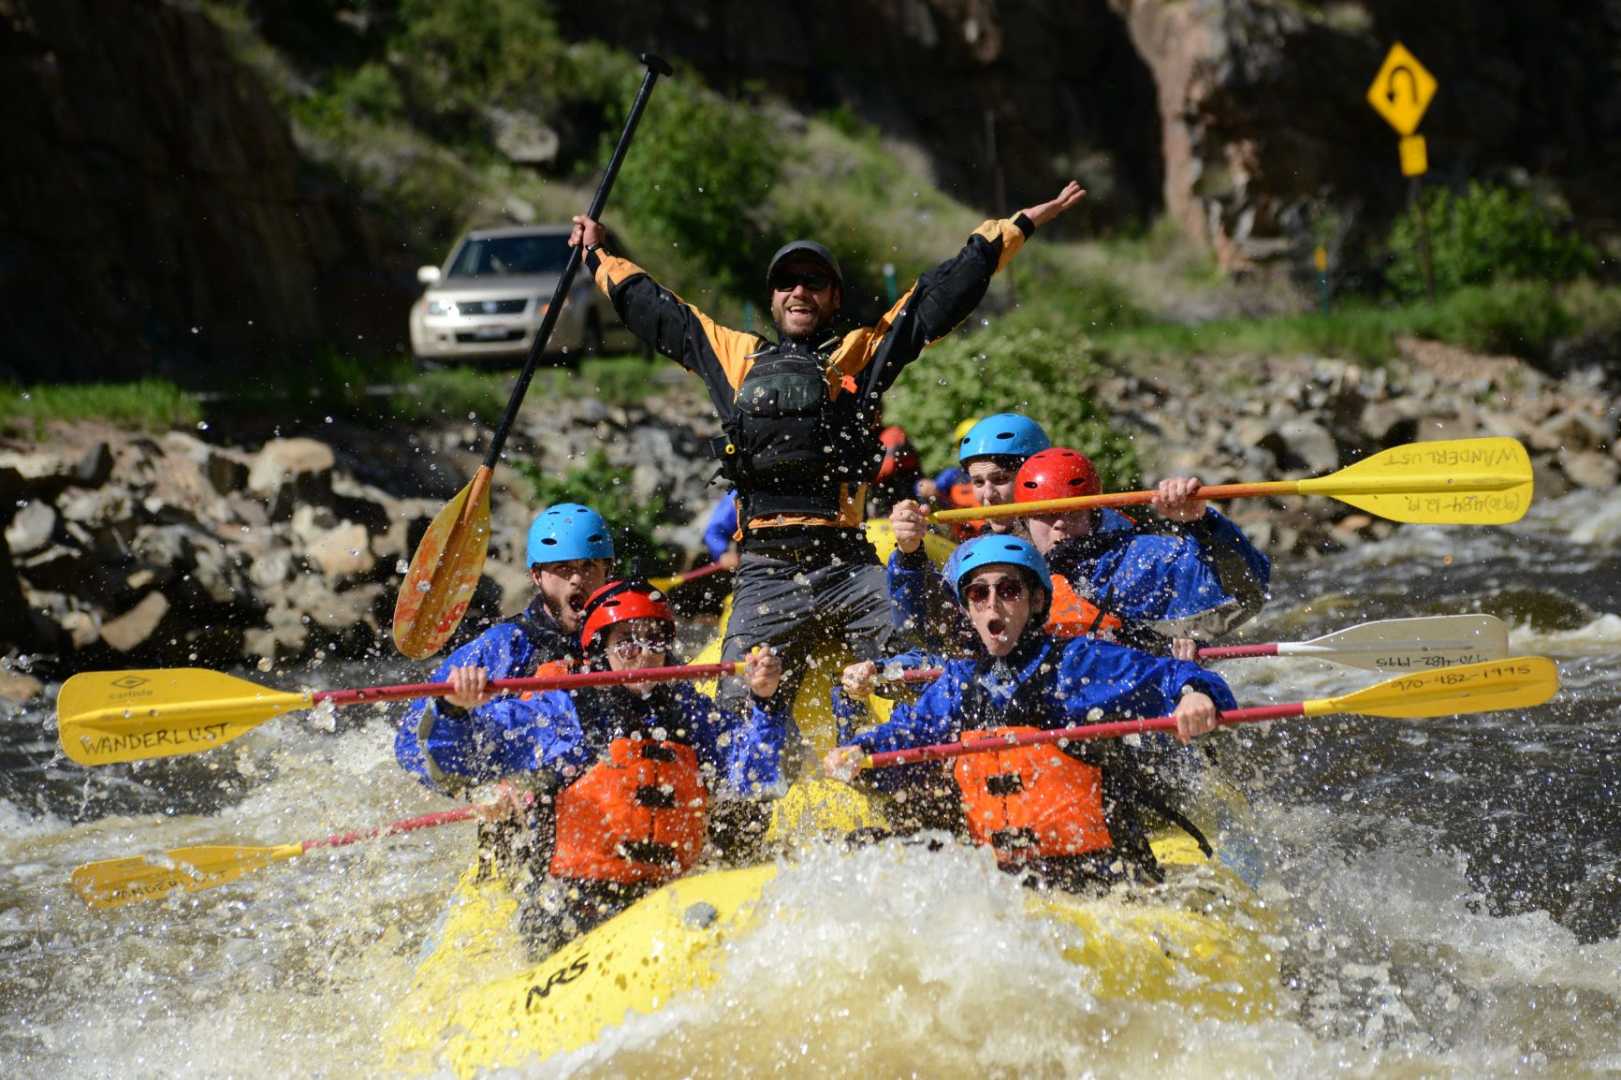 Cheyenne whitewater rafting on the Poudre River